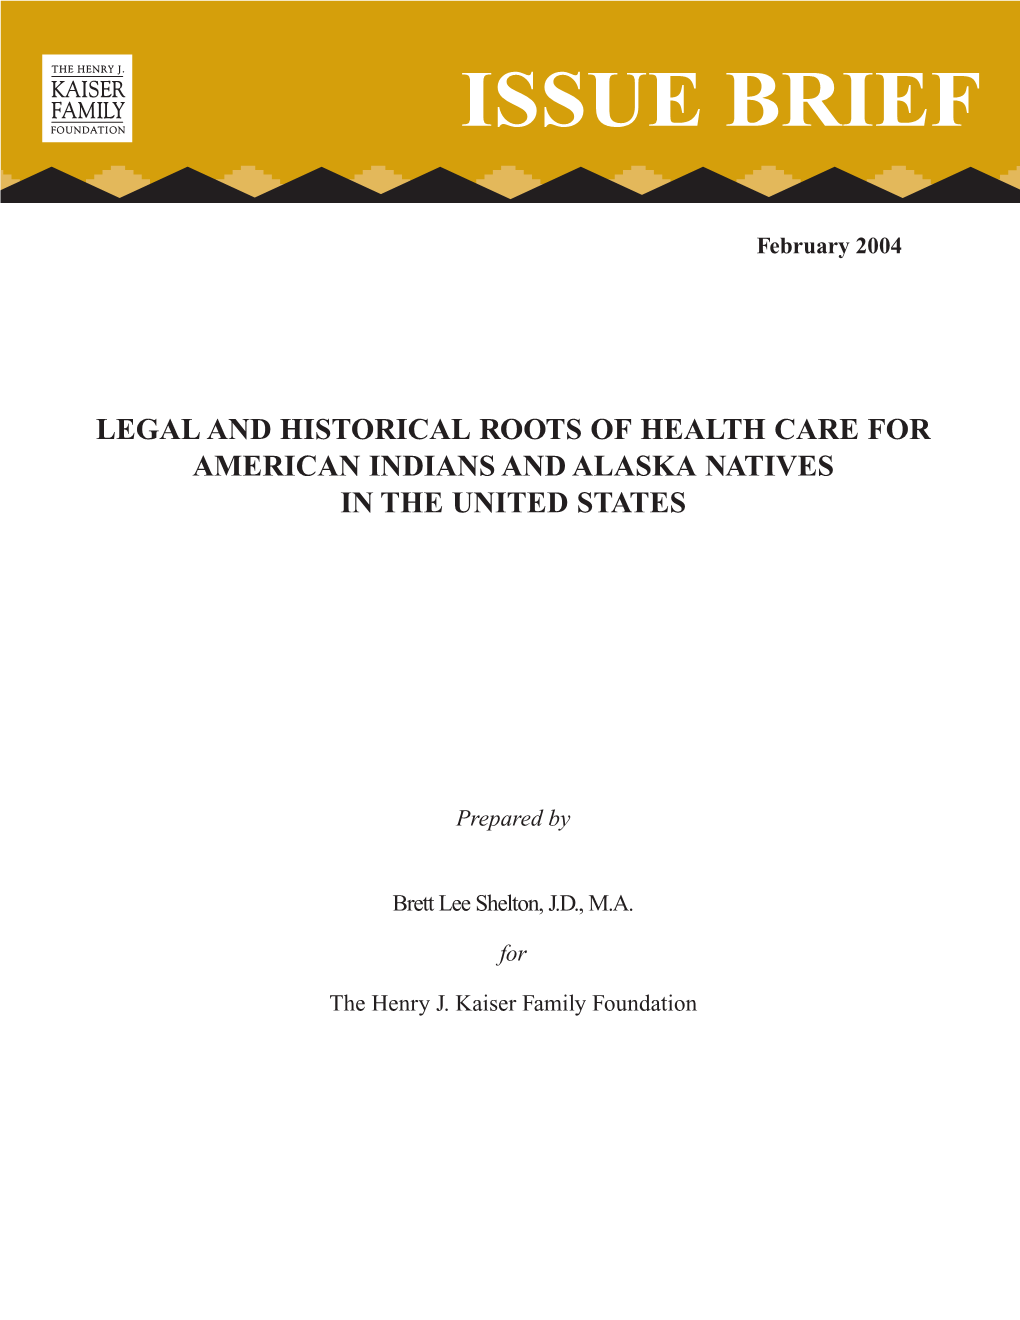 Legal and Historical Roots of Health Care for American Indians and Alaska Natives in the United States